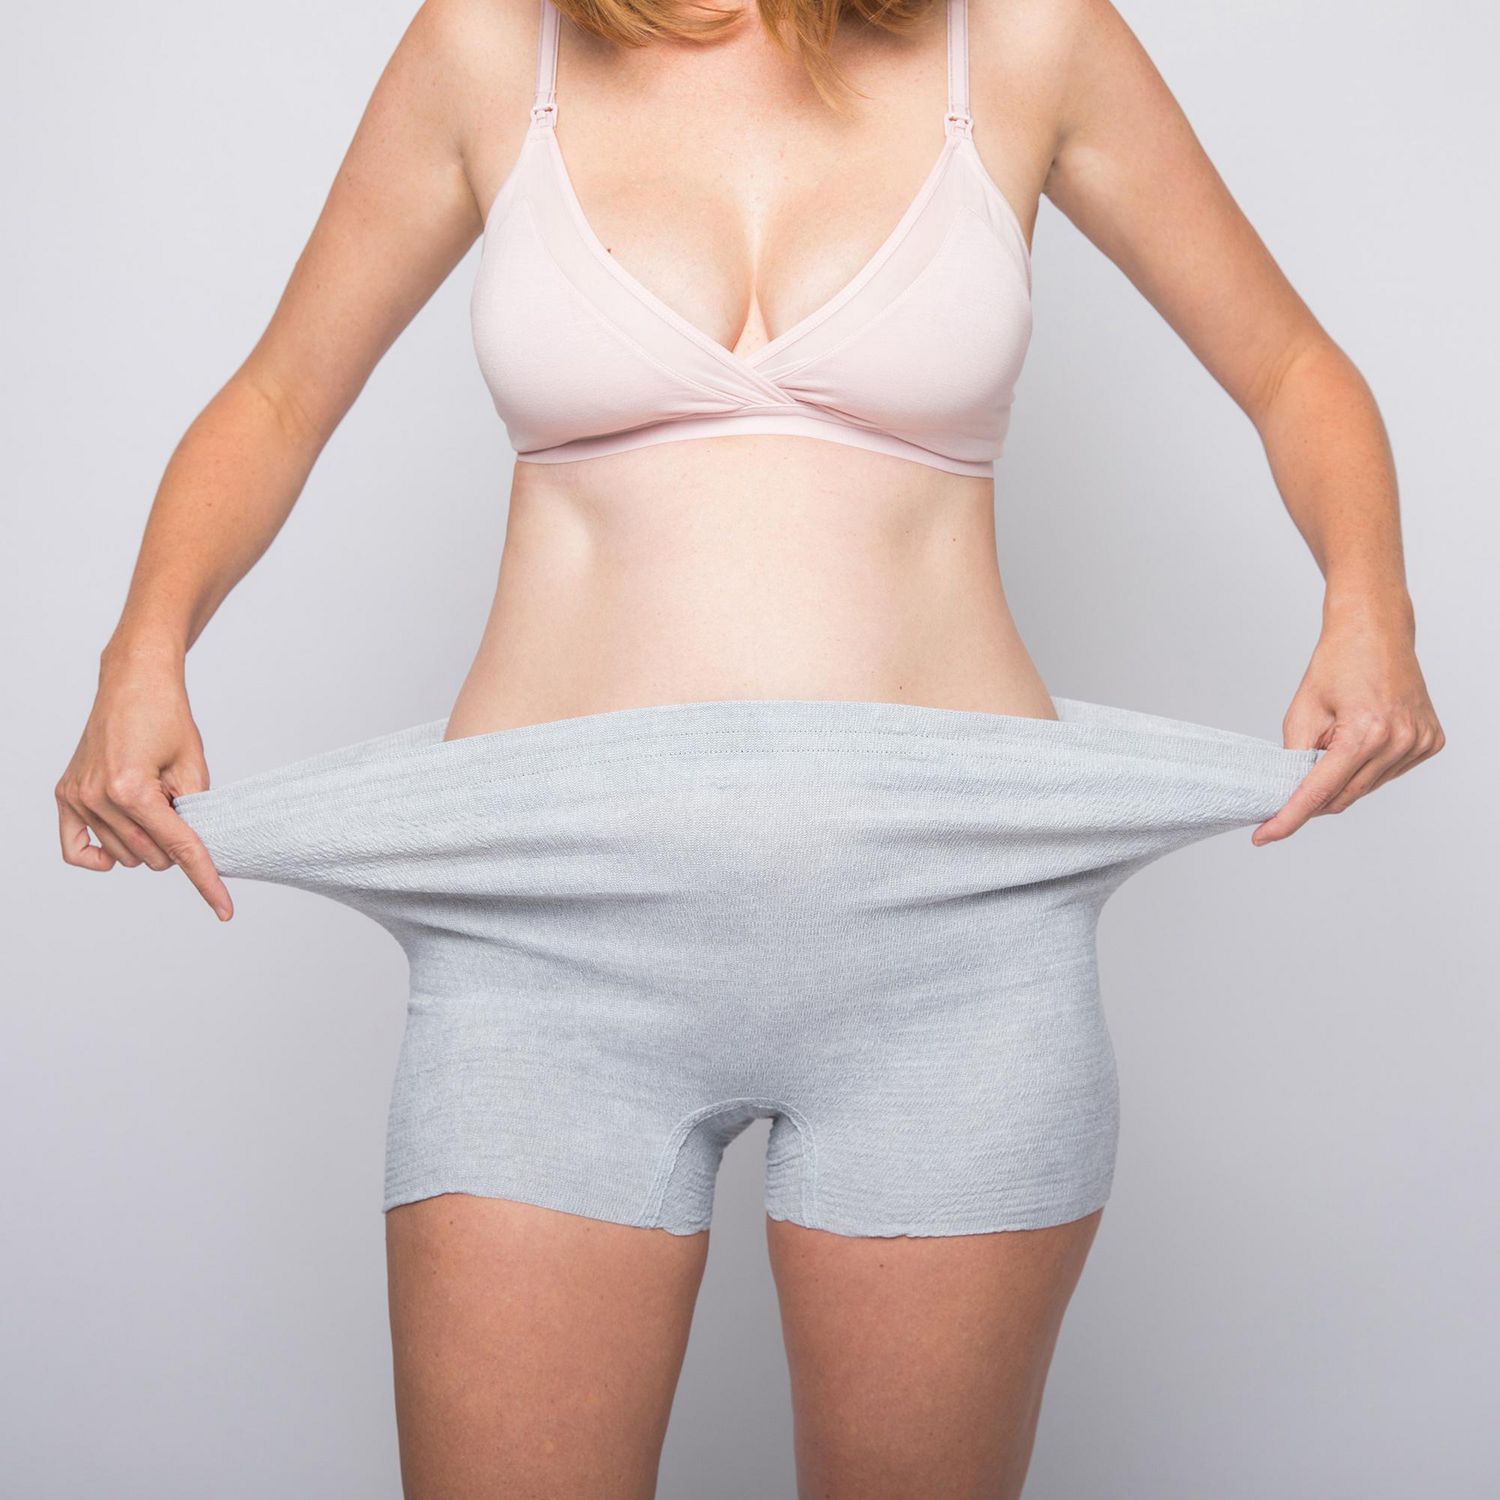 Moms lose over 660 lbs and bare all for the BIG underwear shoot!